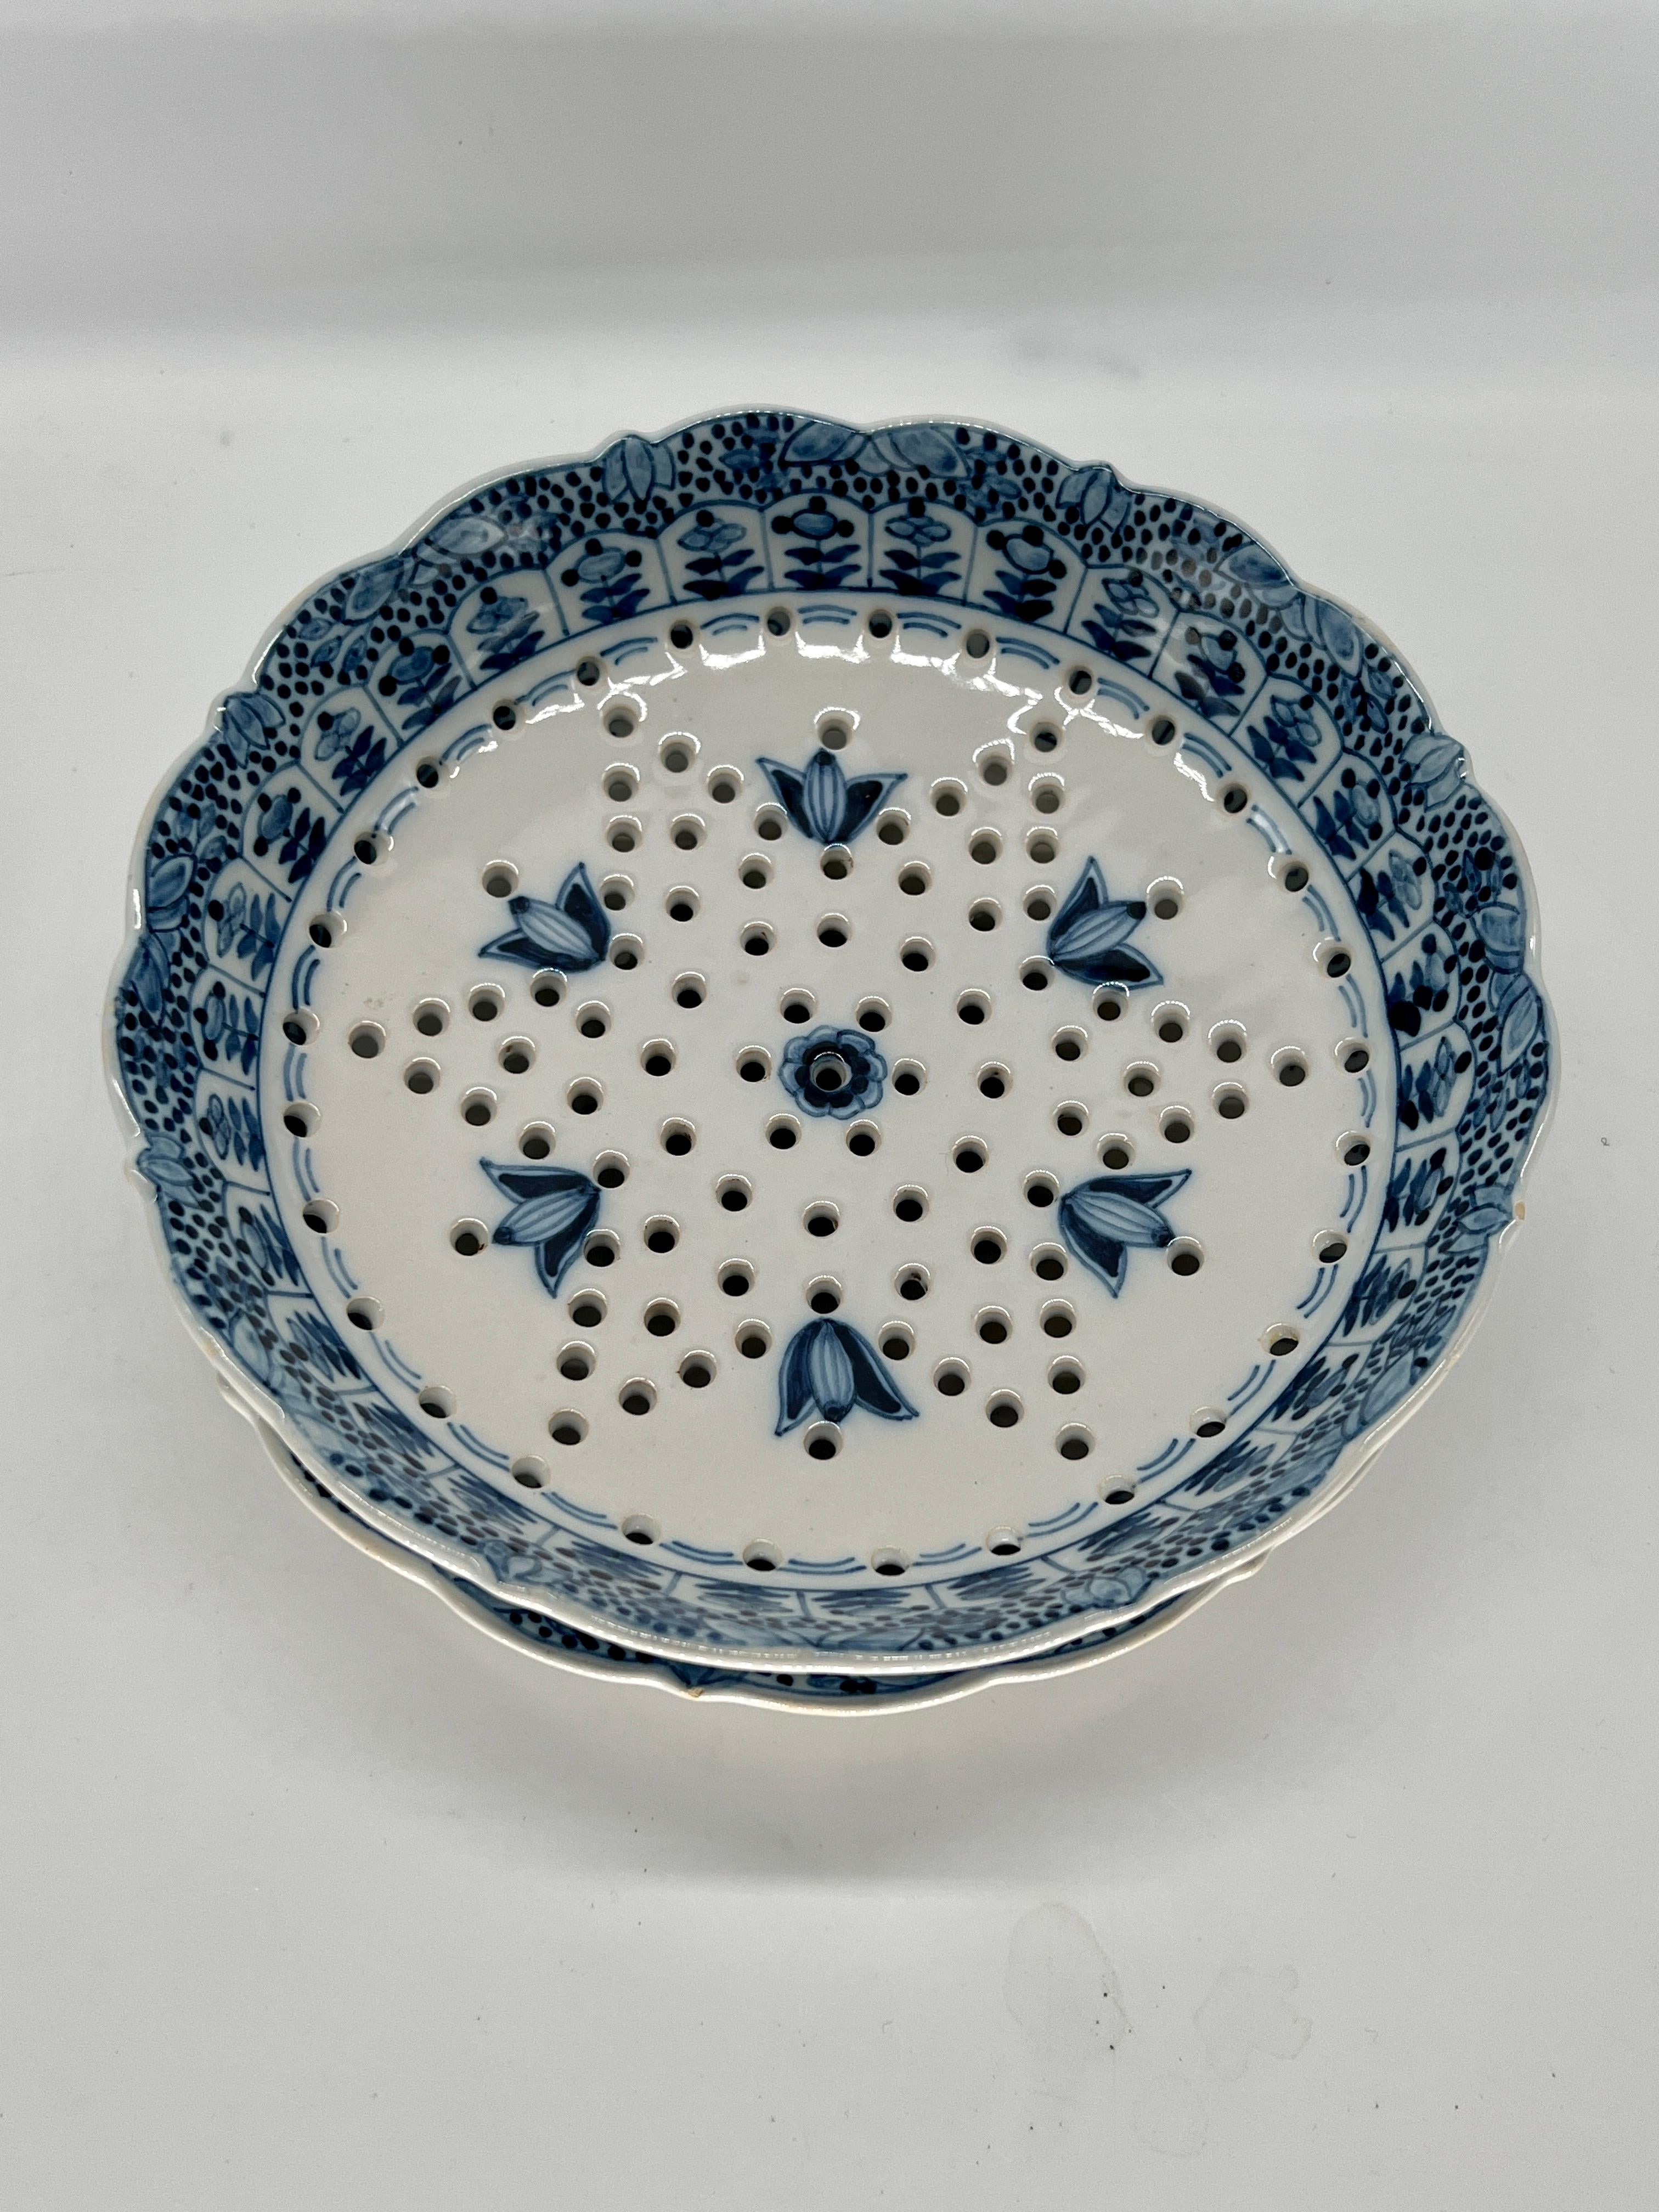 Holland, circa late 19th to early 20th century.

This exquisite 2-piece set from Royal Tichelaar Makkum showcases the timeless beauty of Delft faience craftsmanship. Crafted with meticulous attention to detail, each piece features a delicate floral